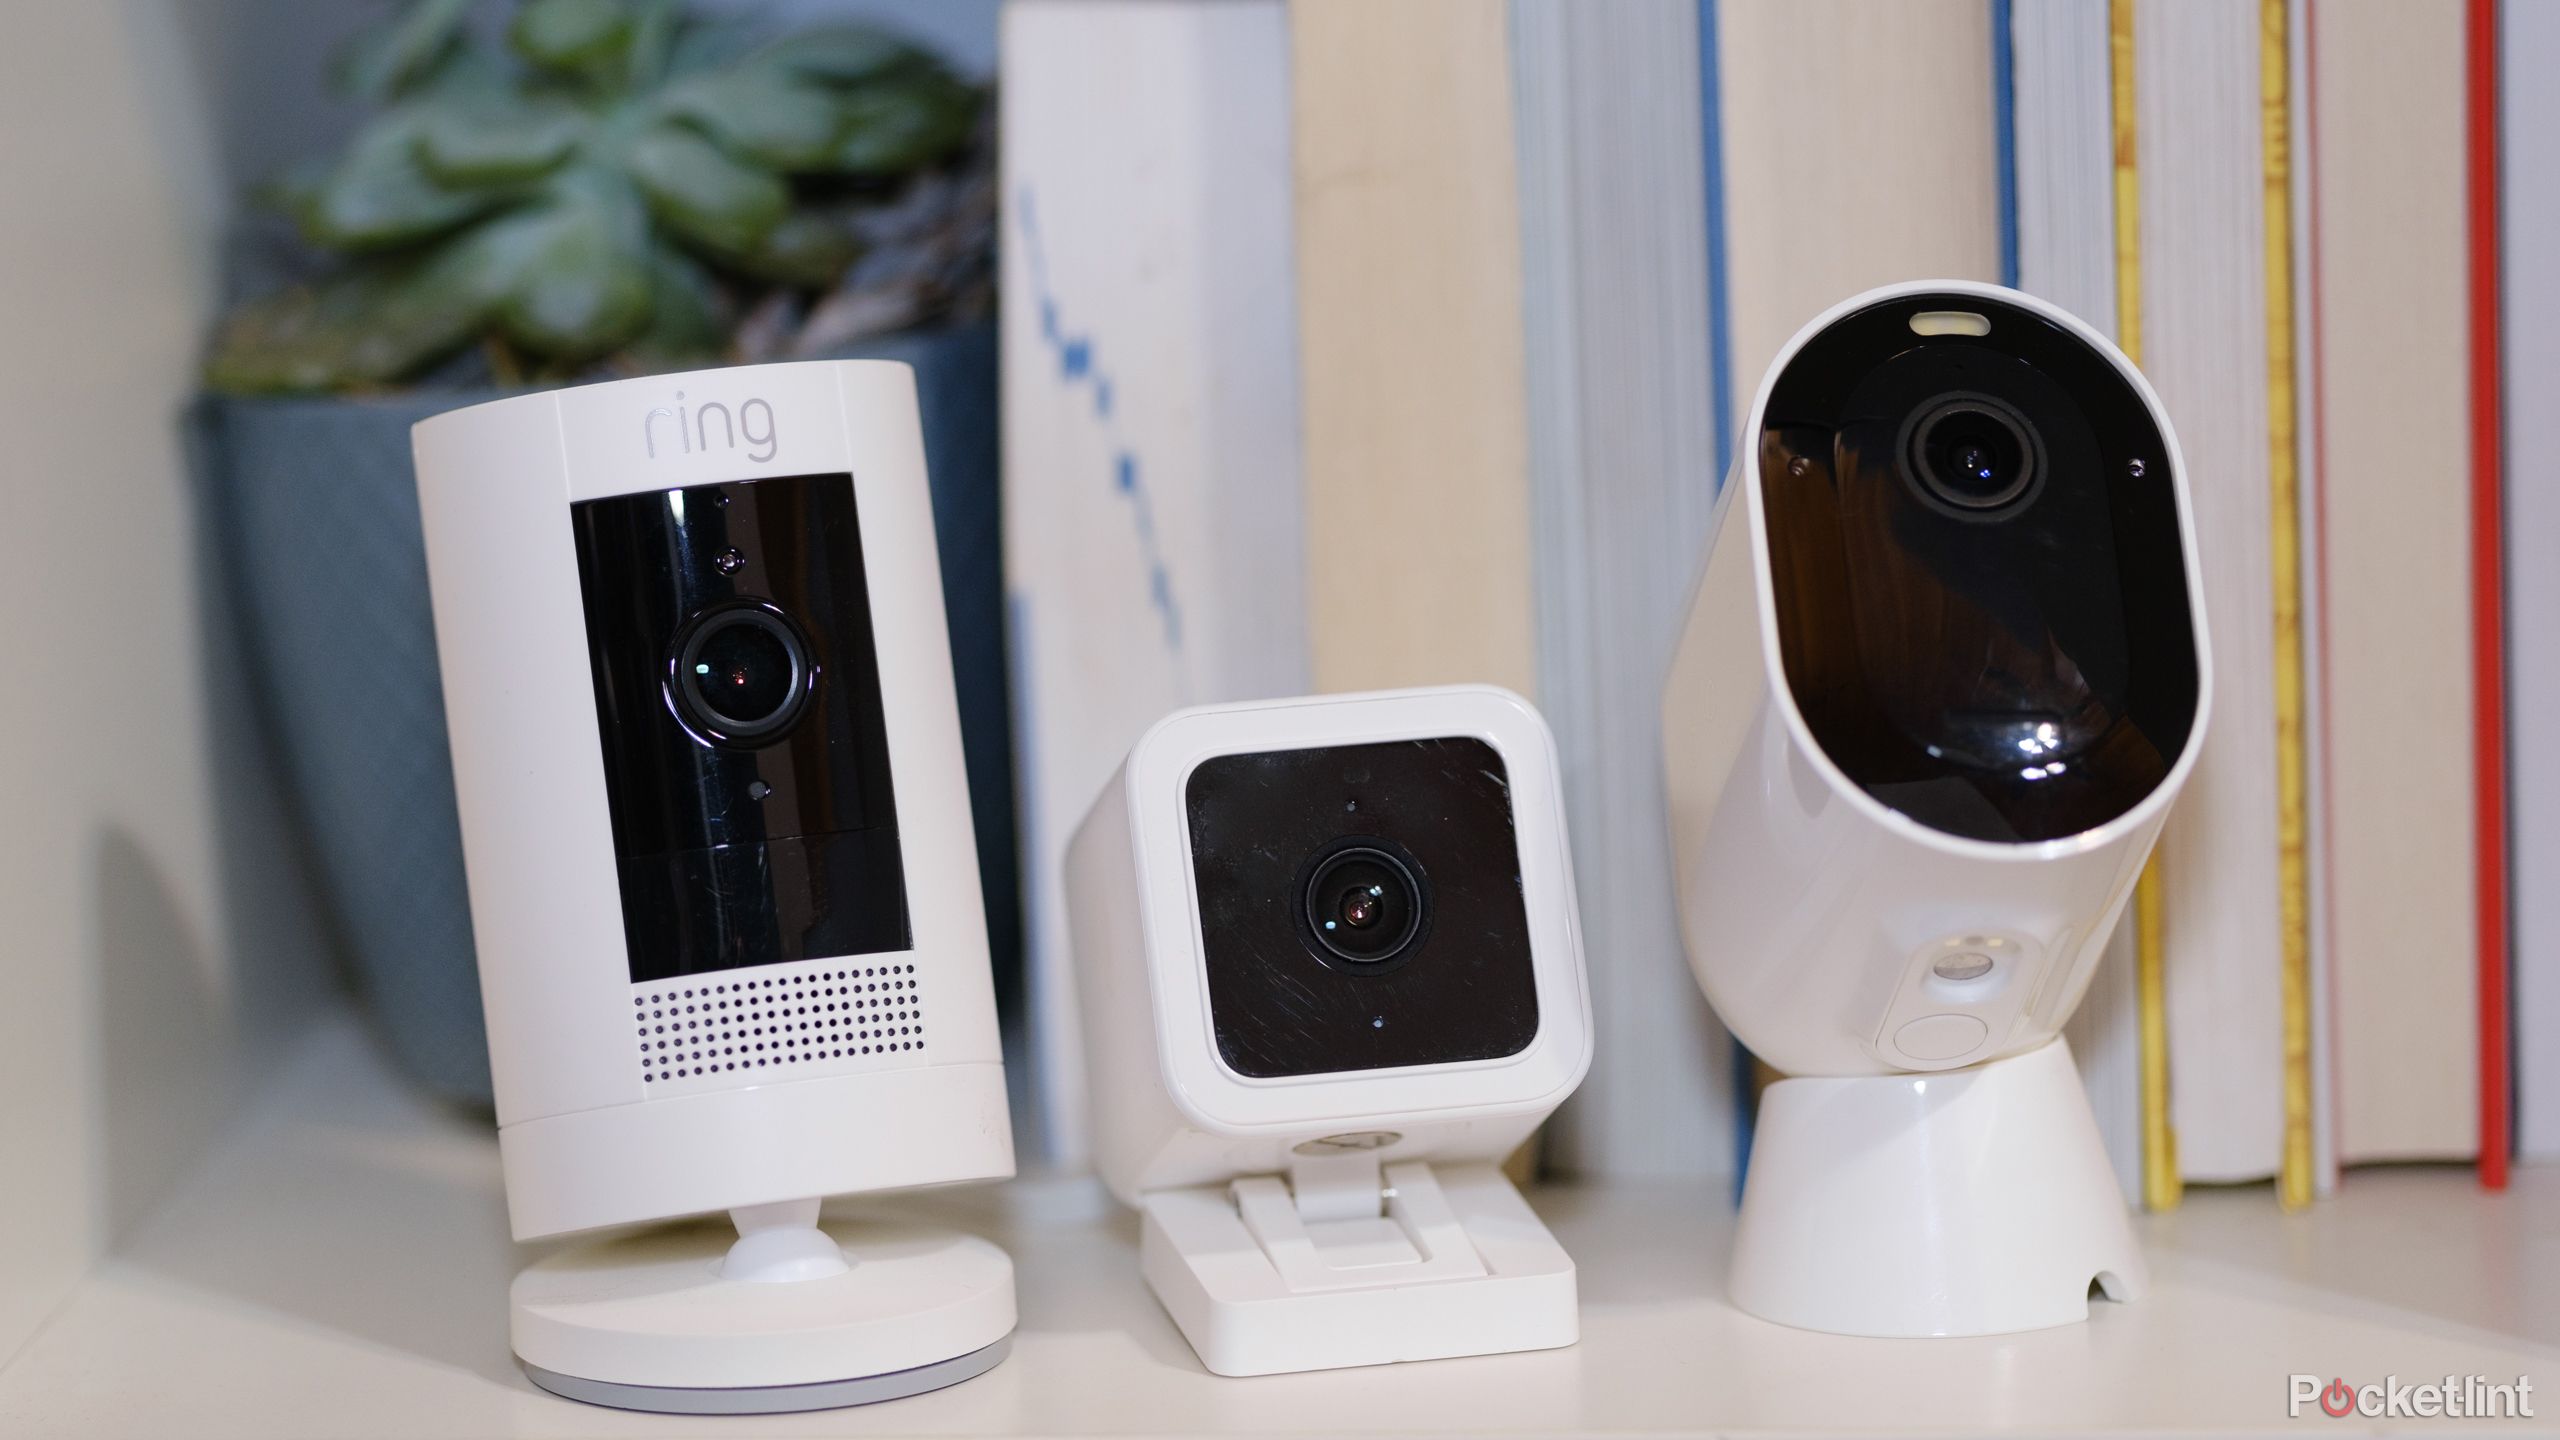 A photo of a Ring, Wyze, and Arlo security camera on a bookshelf